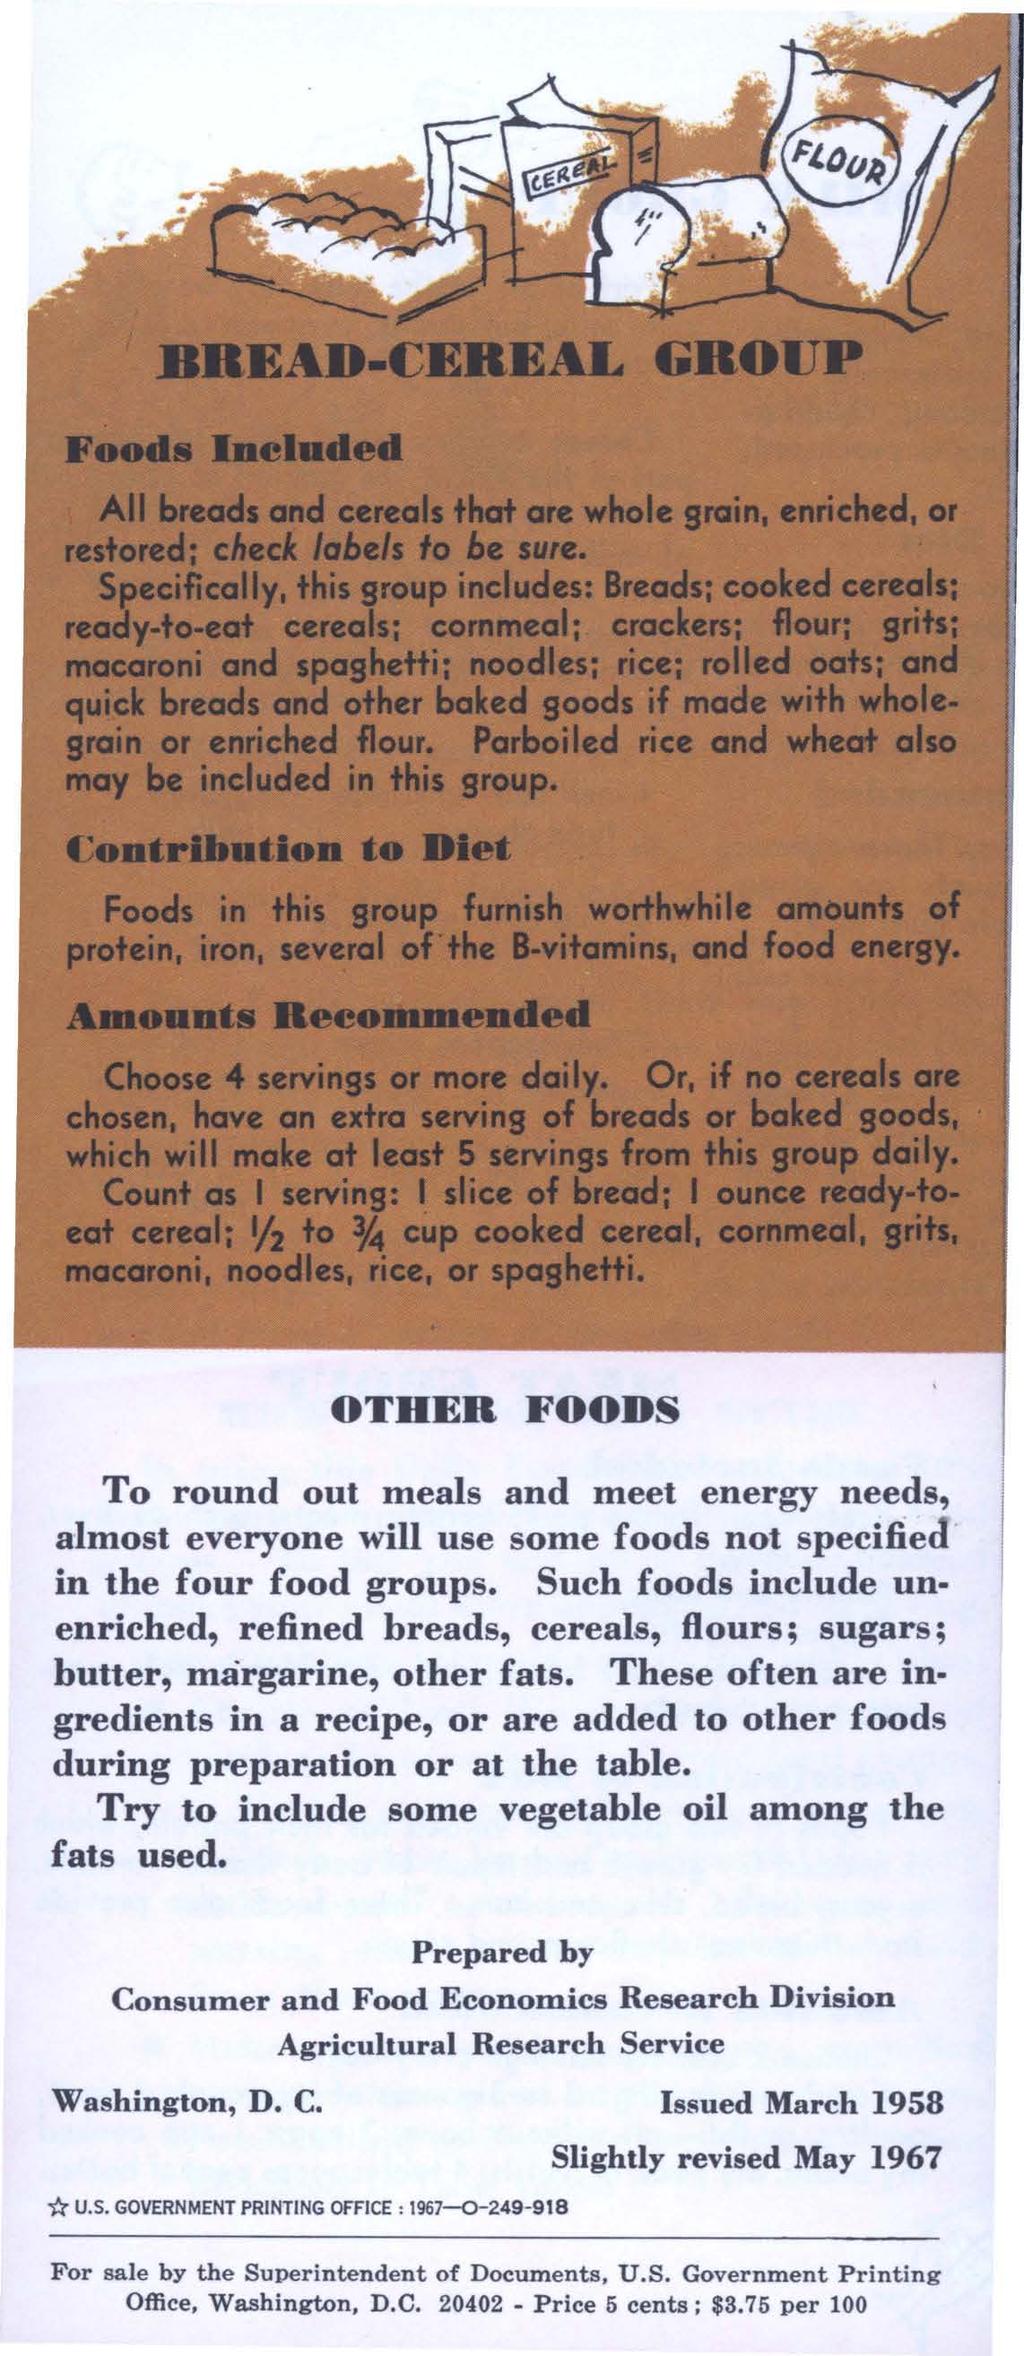 OTHER FOODS To round out meals and meet energy needs, almost everyone will use some foods not specified in the four food groups.